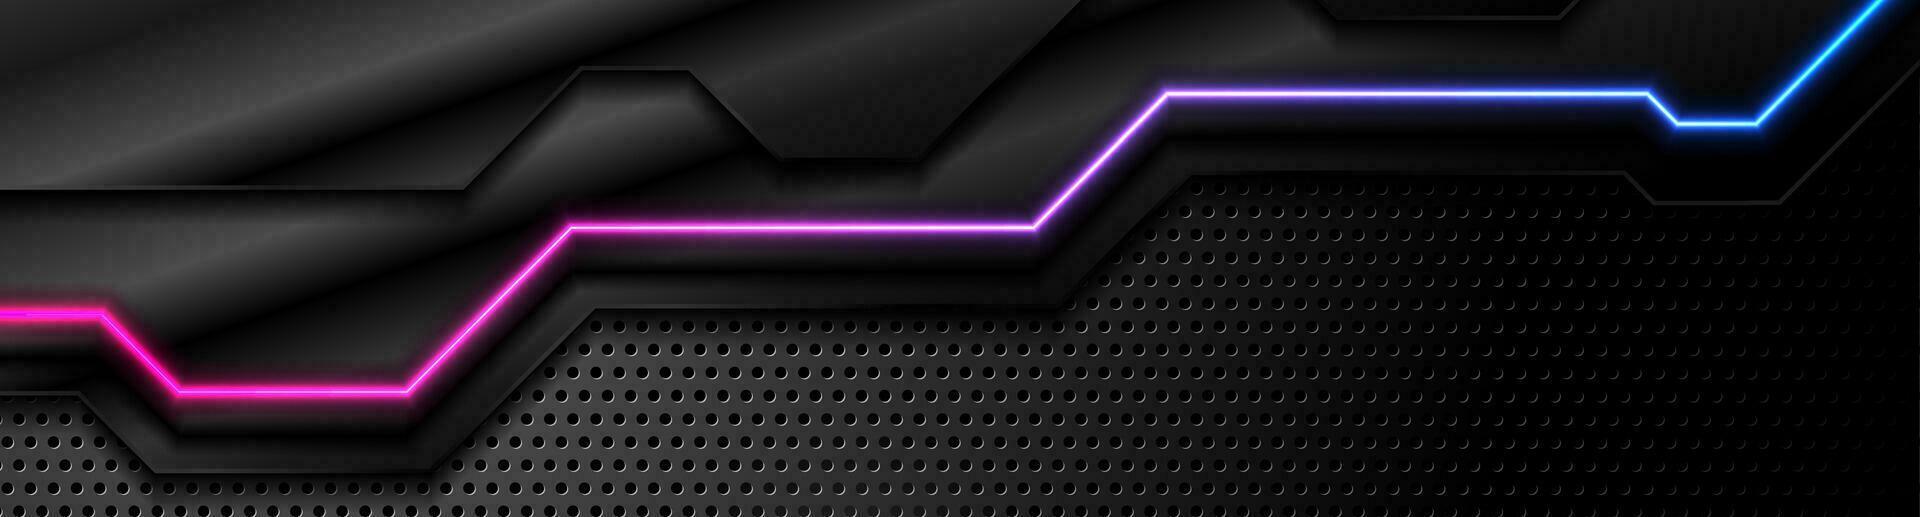 Futuristic abstract technology background with neon line vector